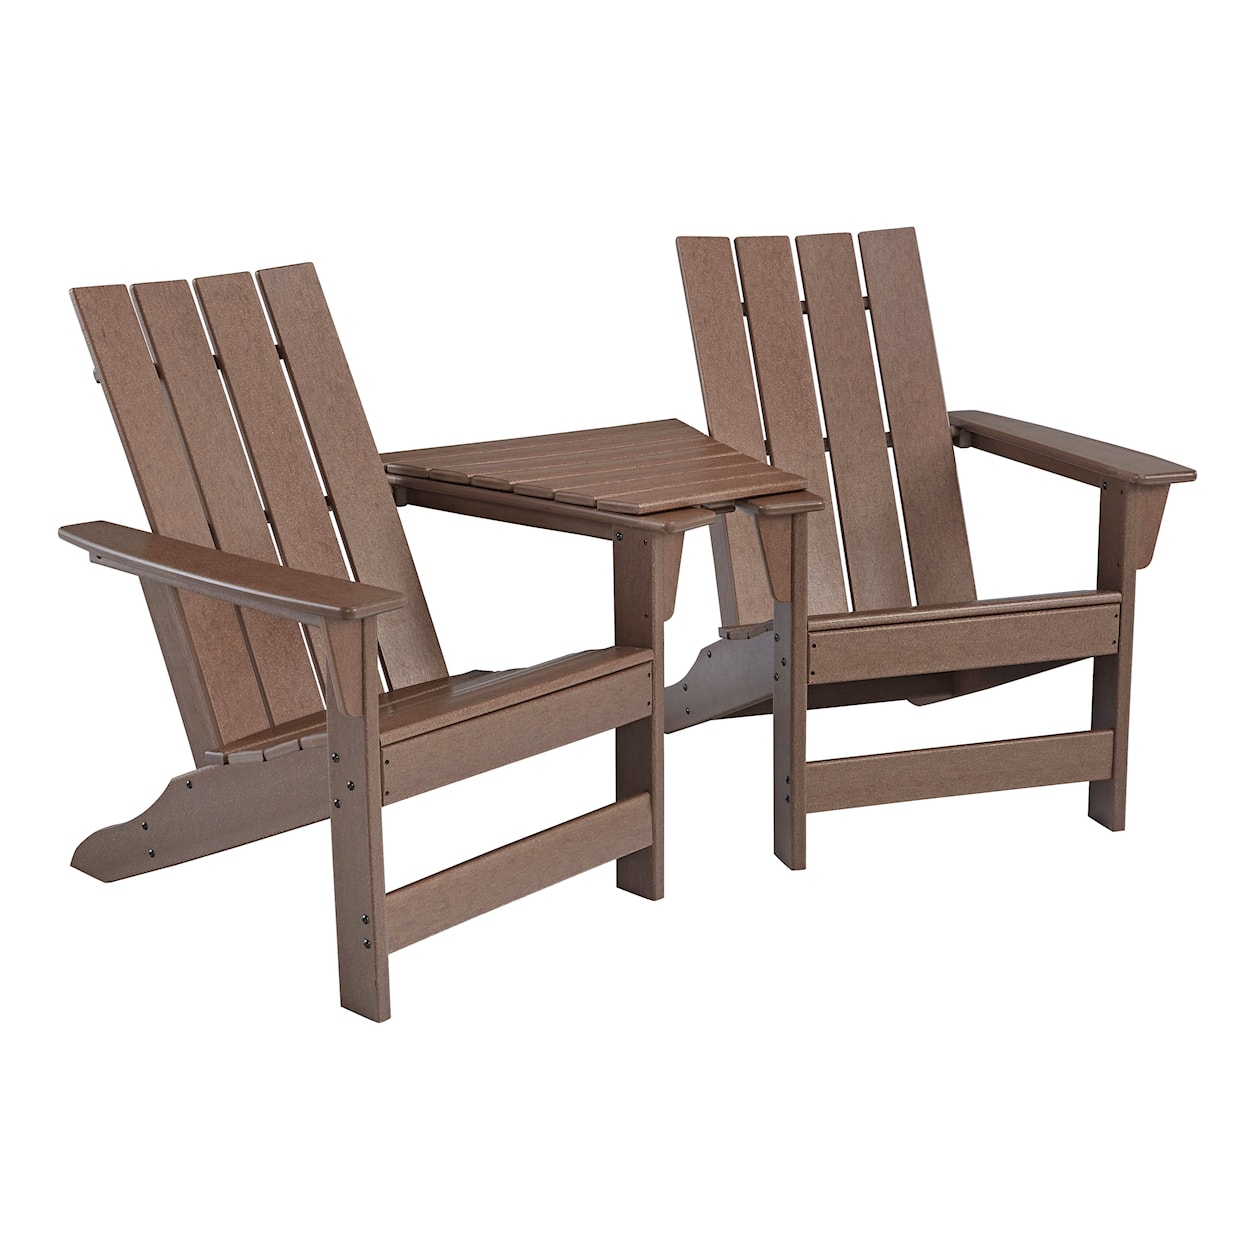 Michael Alan Select Emmeline Adirondack Chair Set with Tete-A-Tete Table